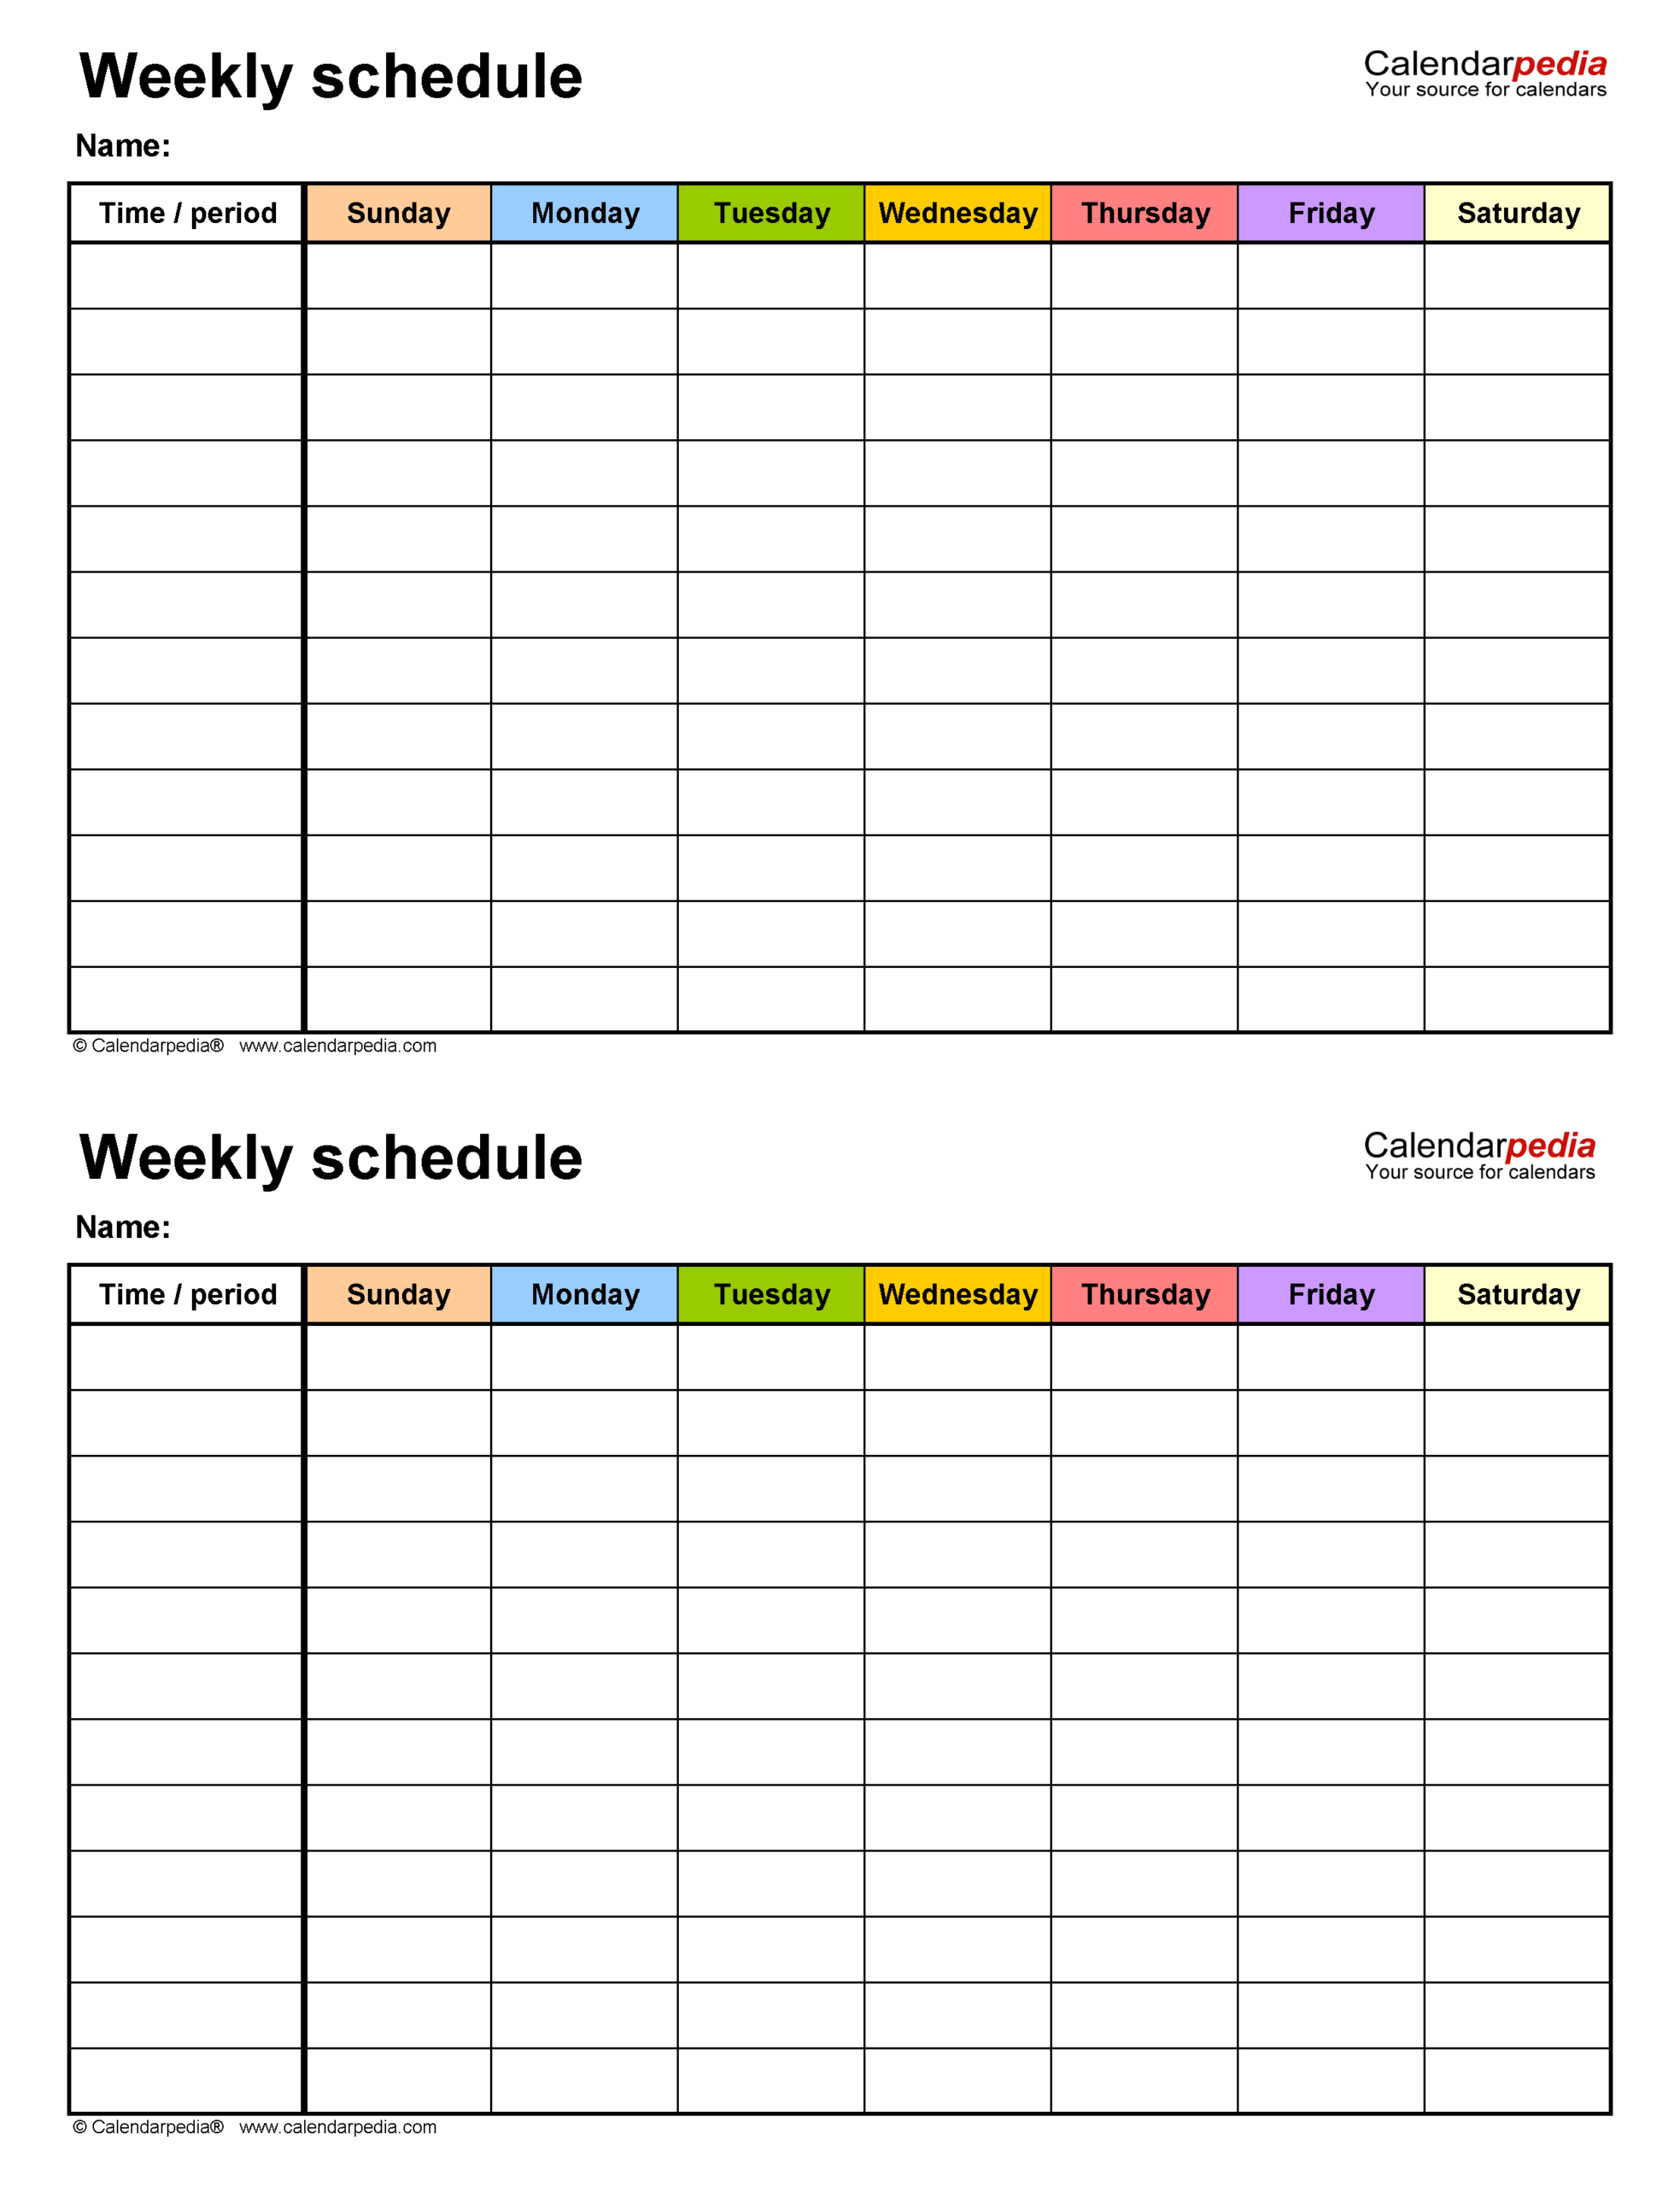 Free Weekly Schedules For Excel - 18 Templates